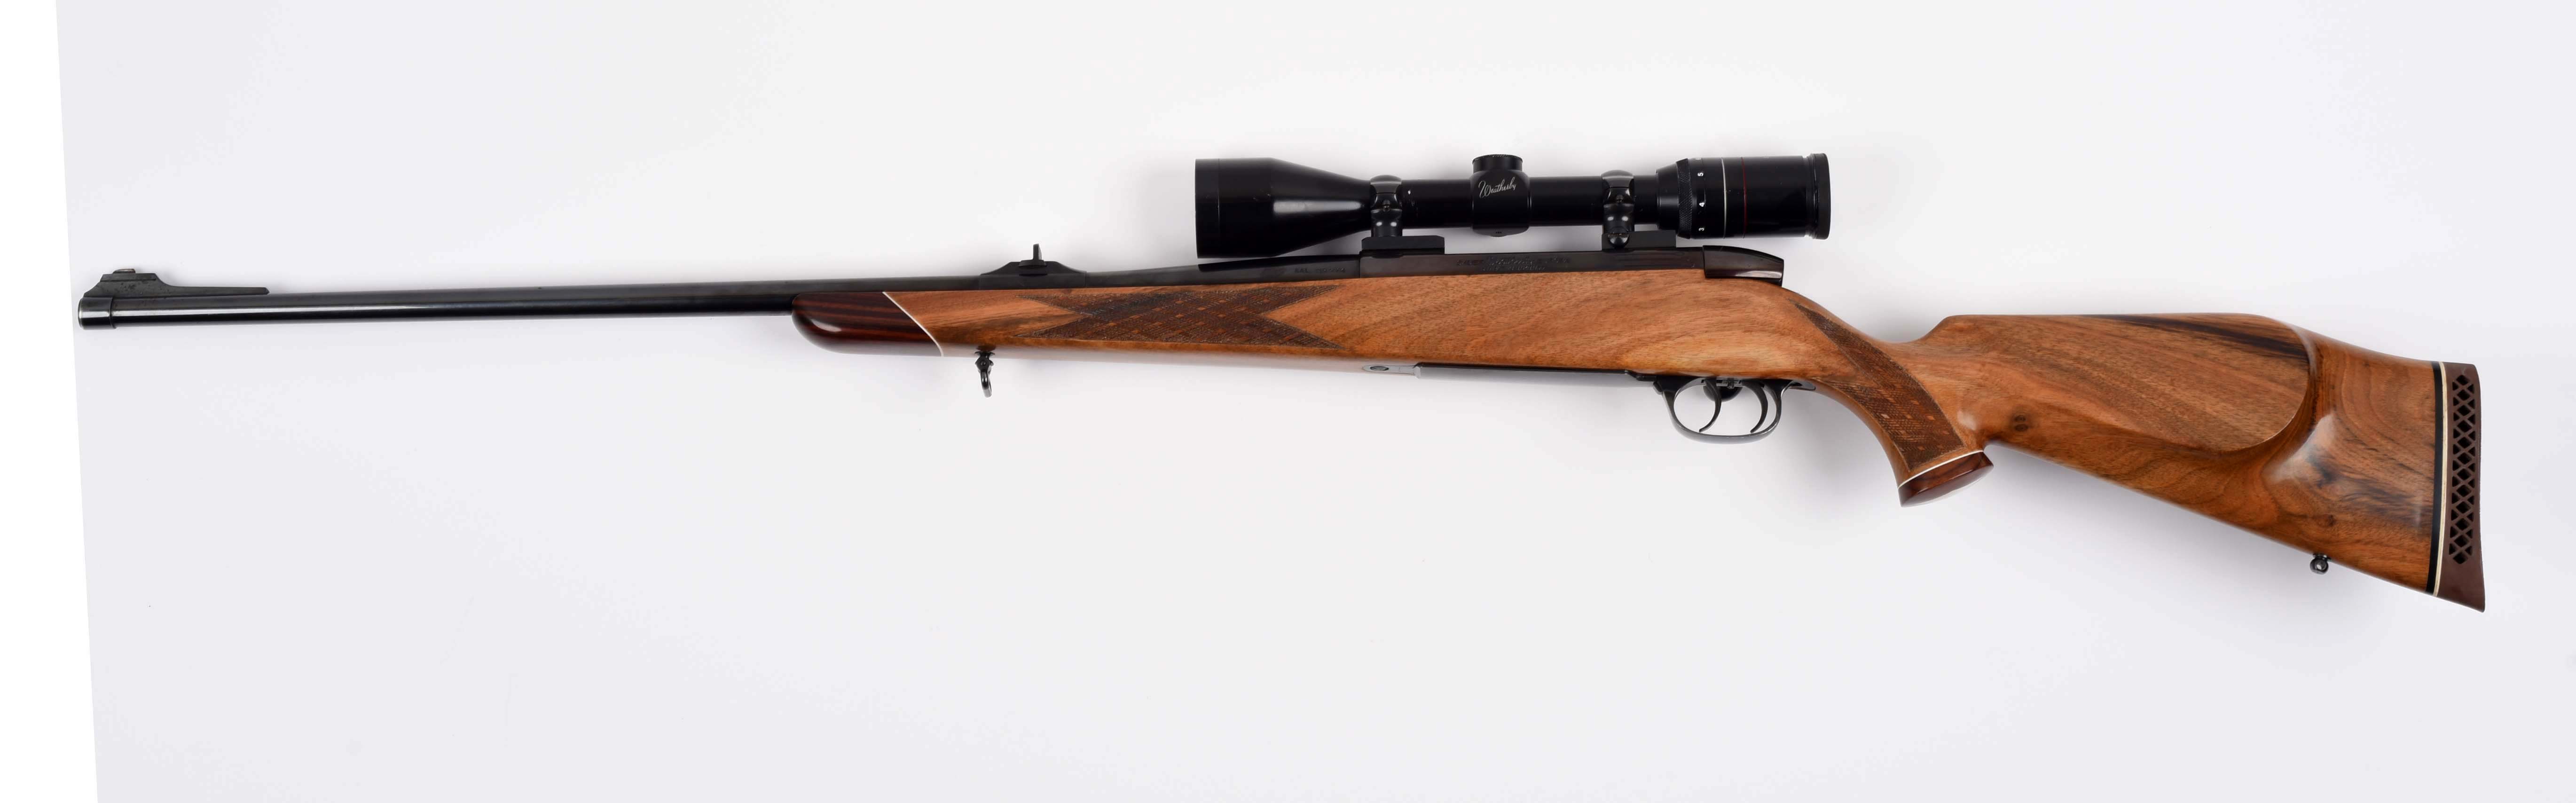 (M^) Rare German Made Weatherby Sauer Europa Bolt Action Sporing Rifle with Double Set Triggers. - Image 2 of 8